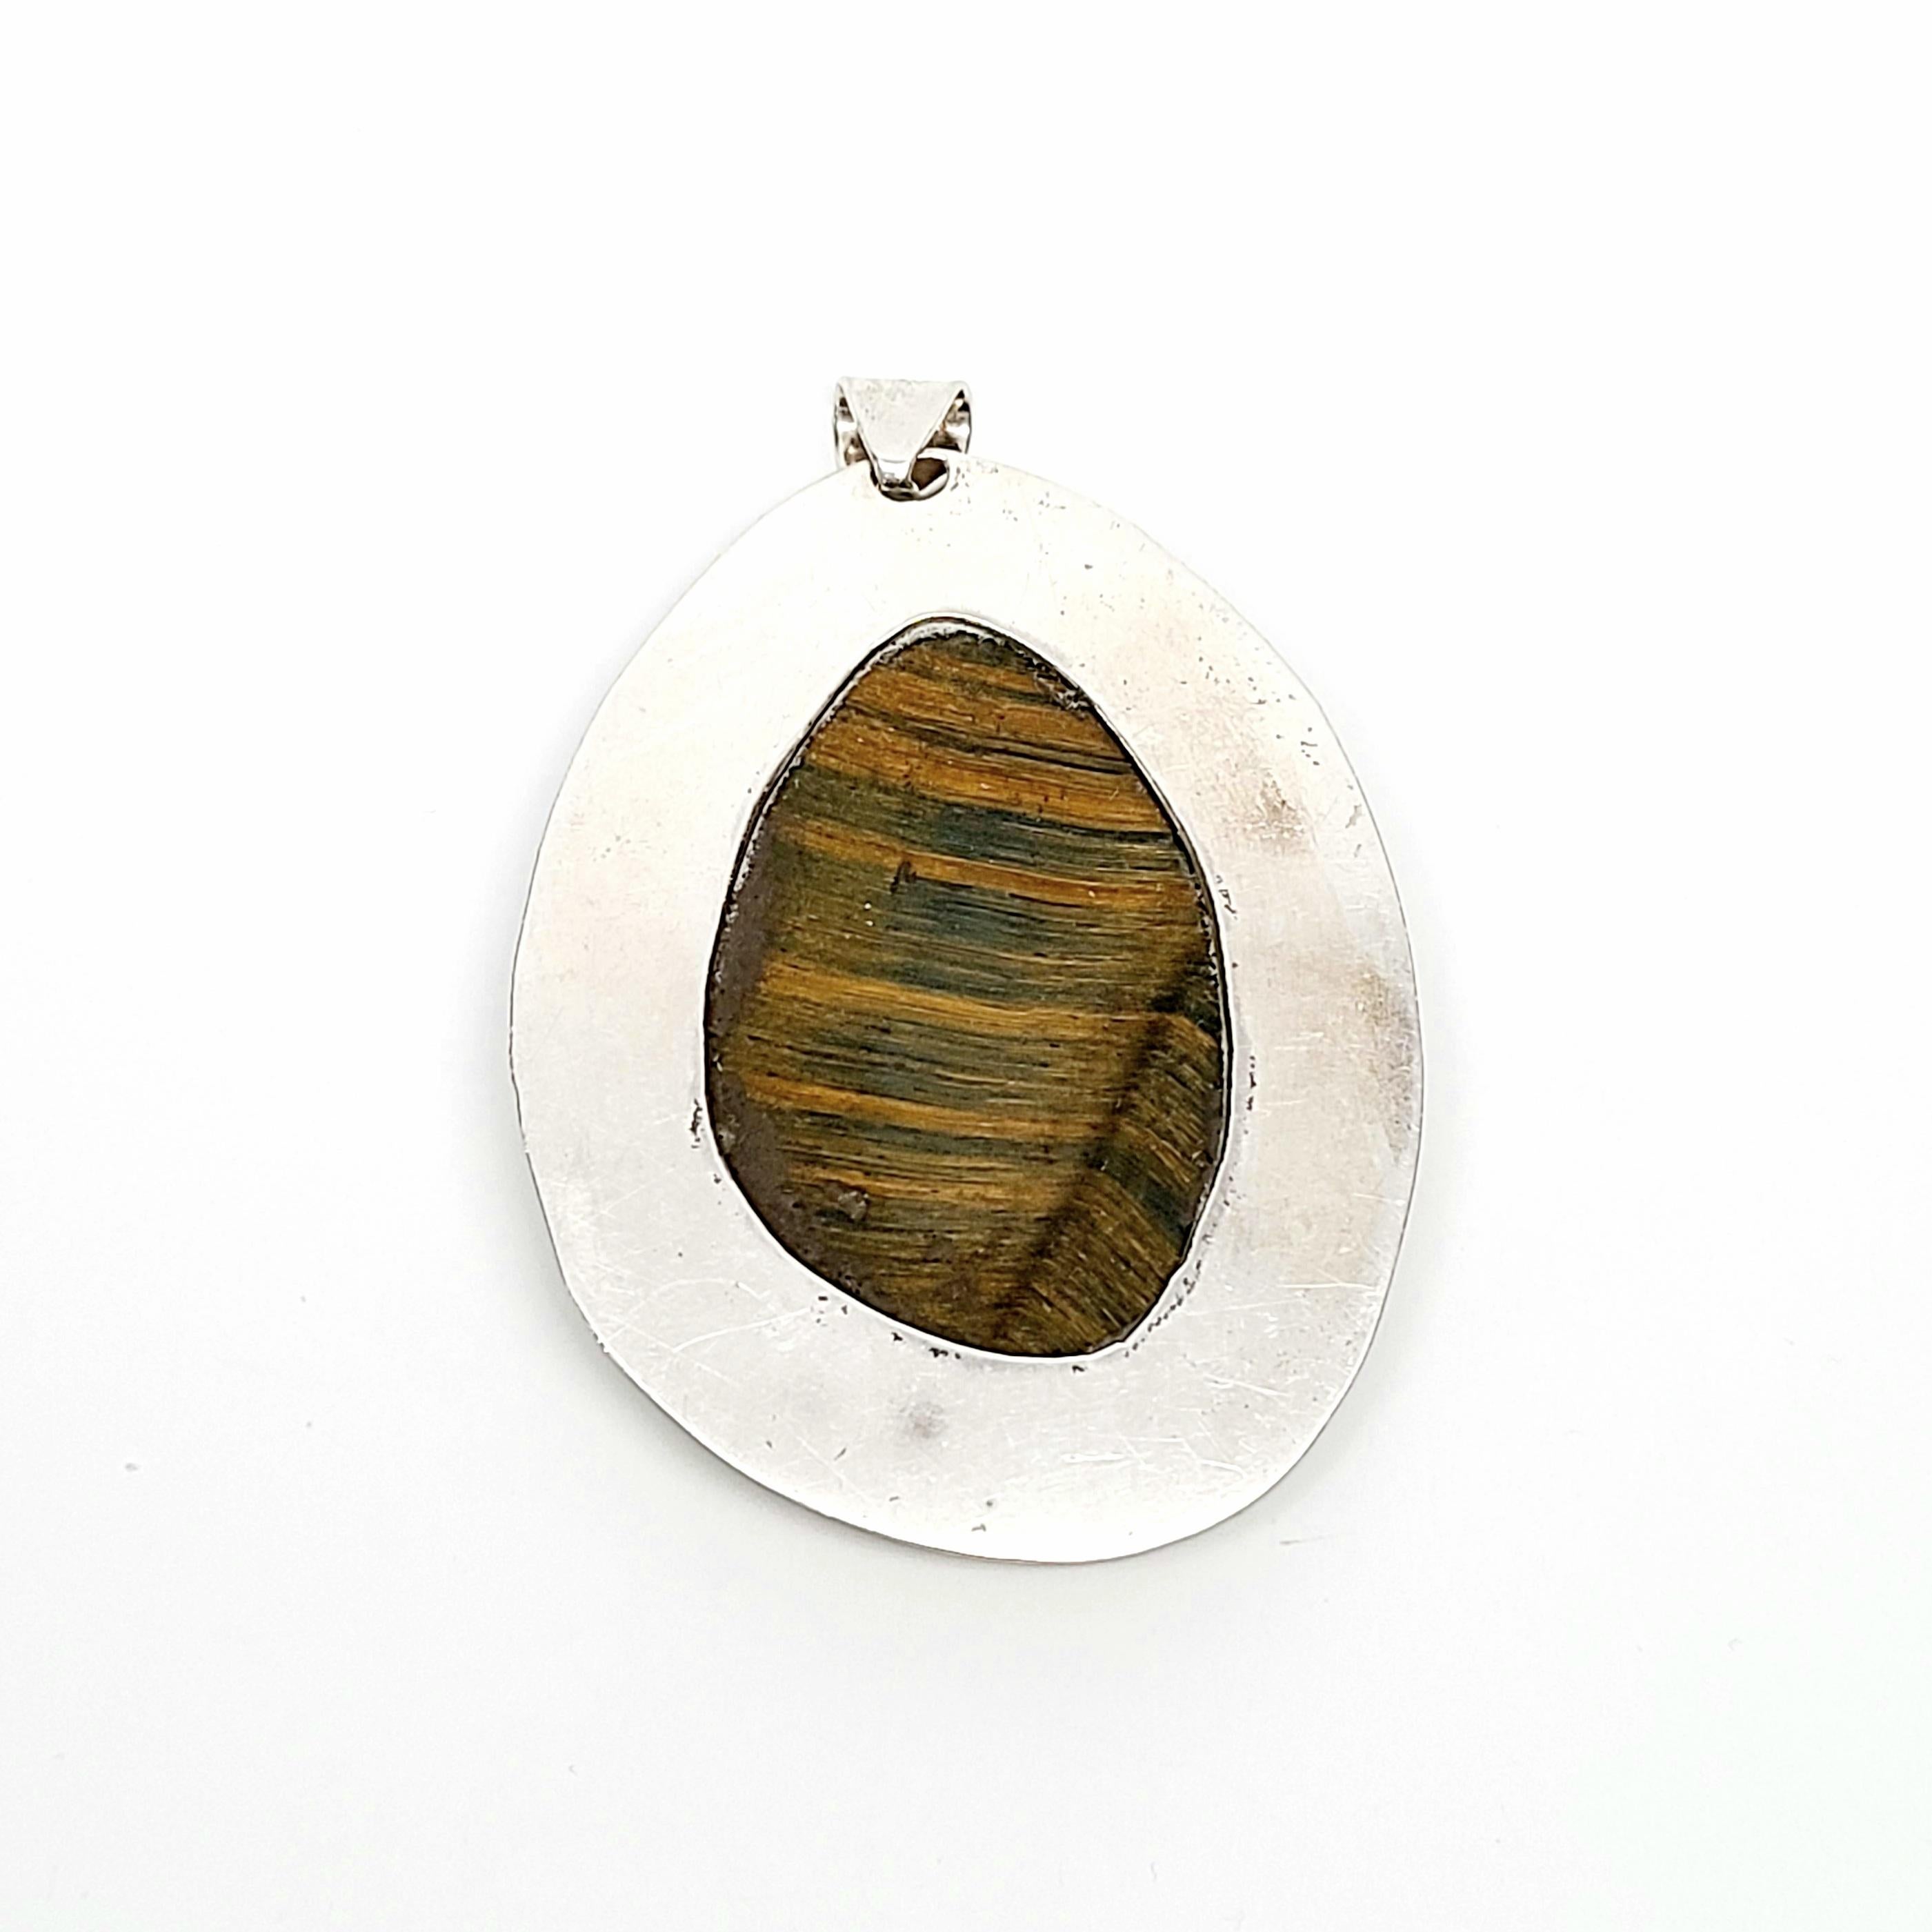 Sterling silver and tiger's eye large pendant.

A large, beautifully banded tiger's eye stone is bezel set in an etched frame.

Measures approx 2 7/8